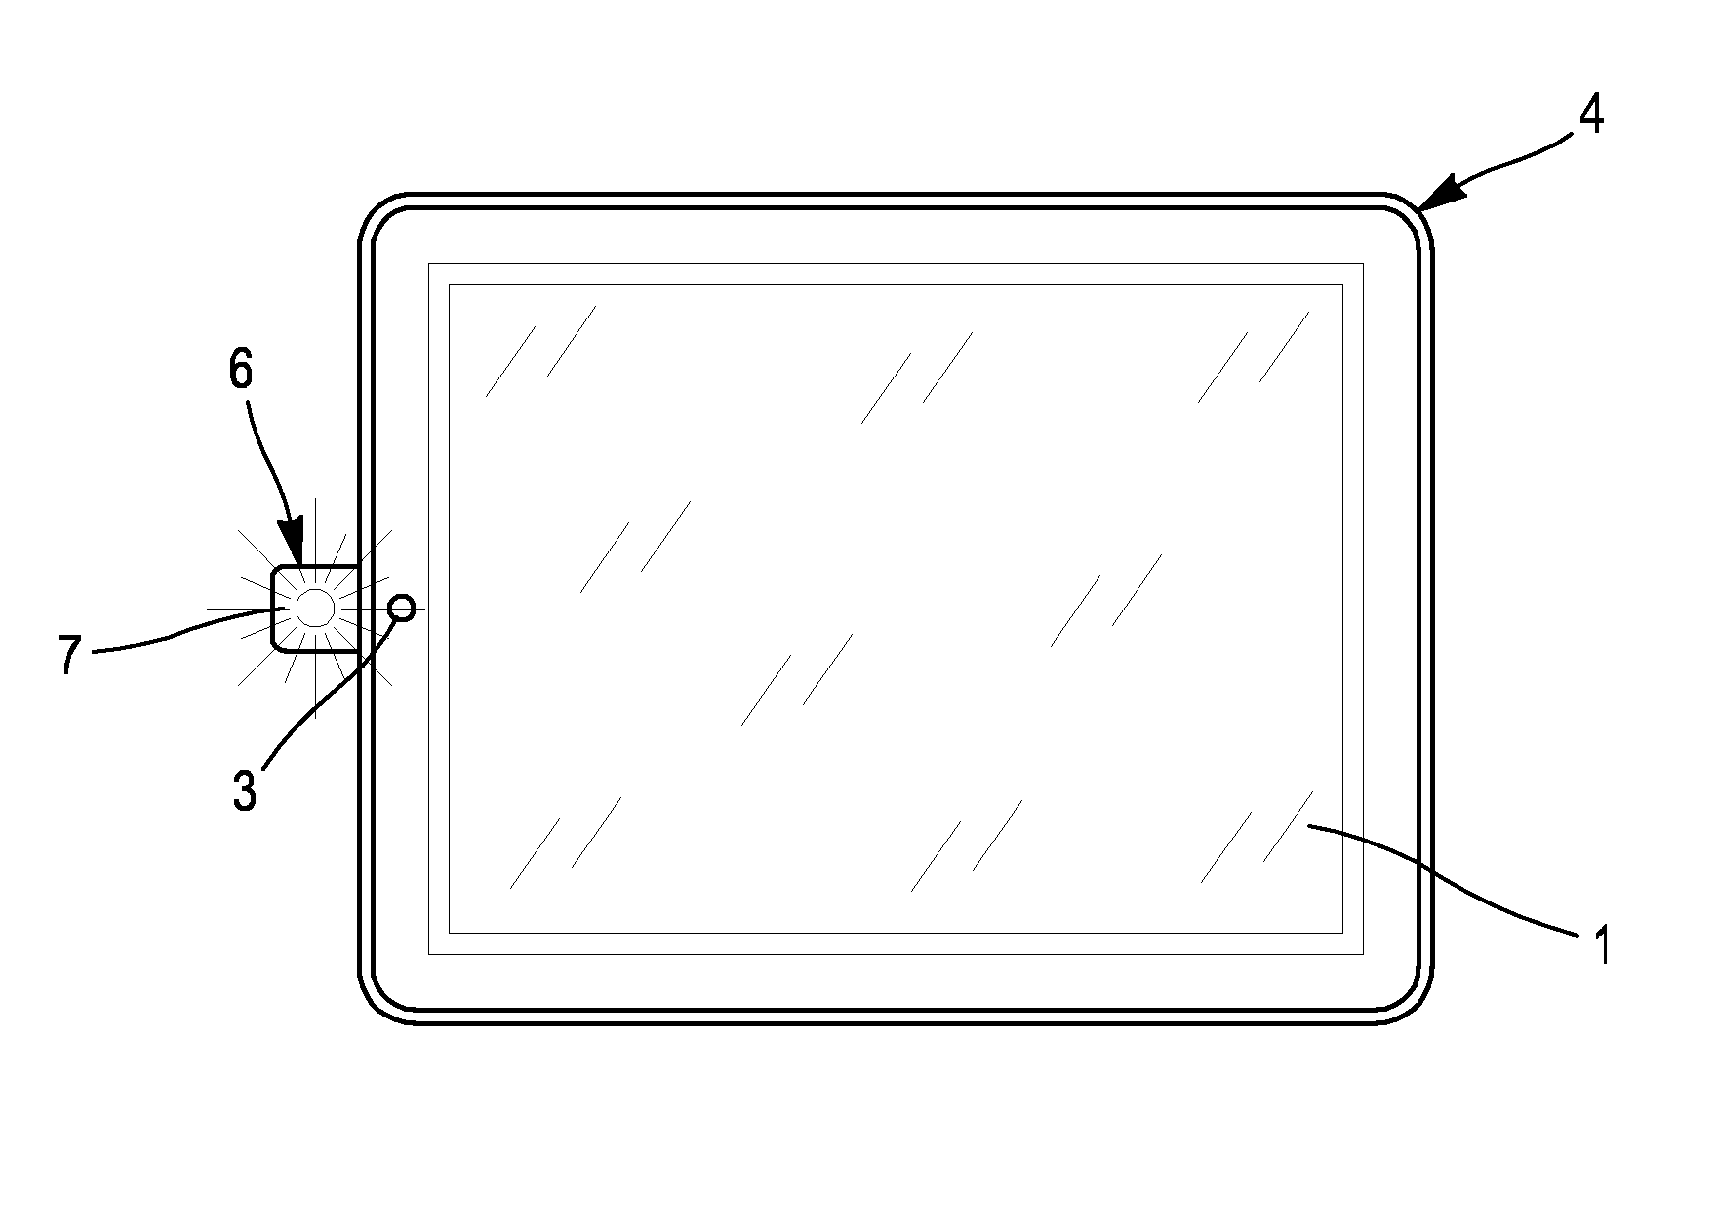 Photographic lighting system for tactile tablet